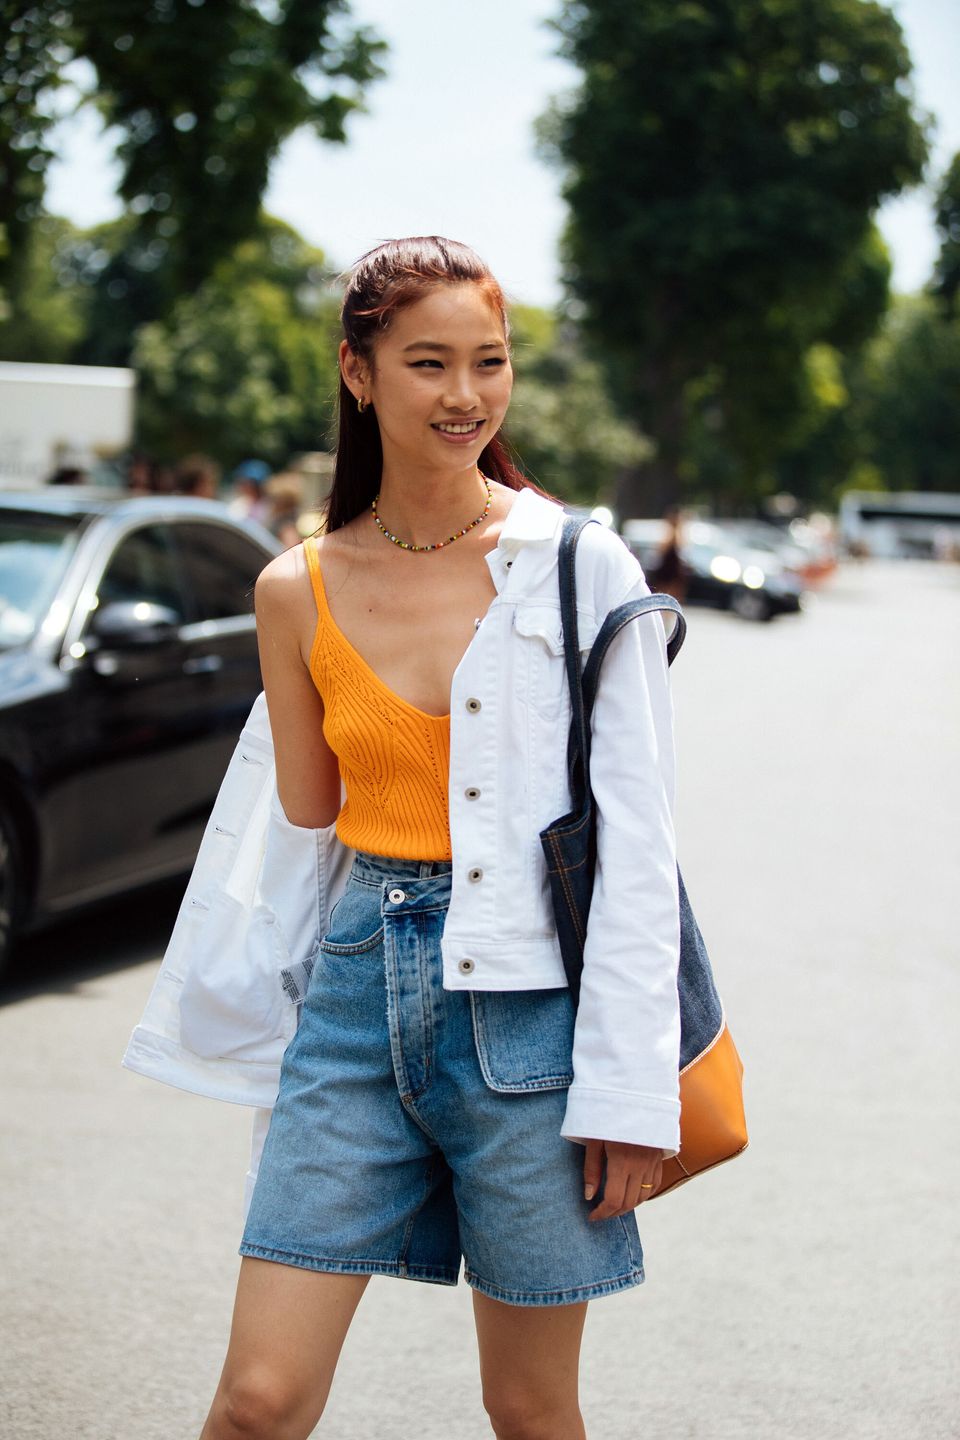 Hoyeon Jung after Poiret S/S 19 – THE MODEL SPOTTER